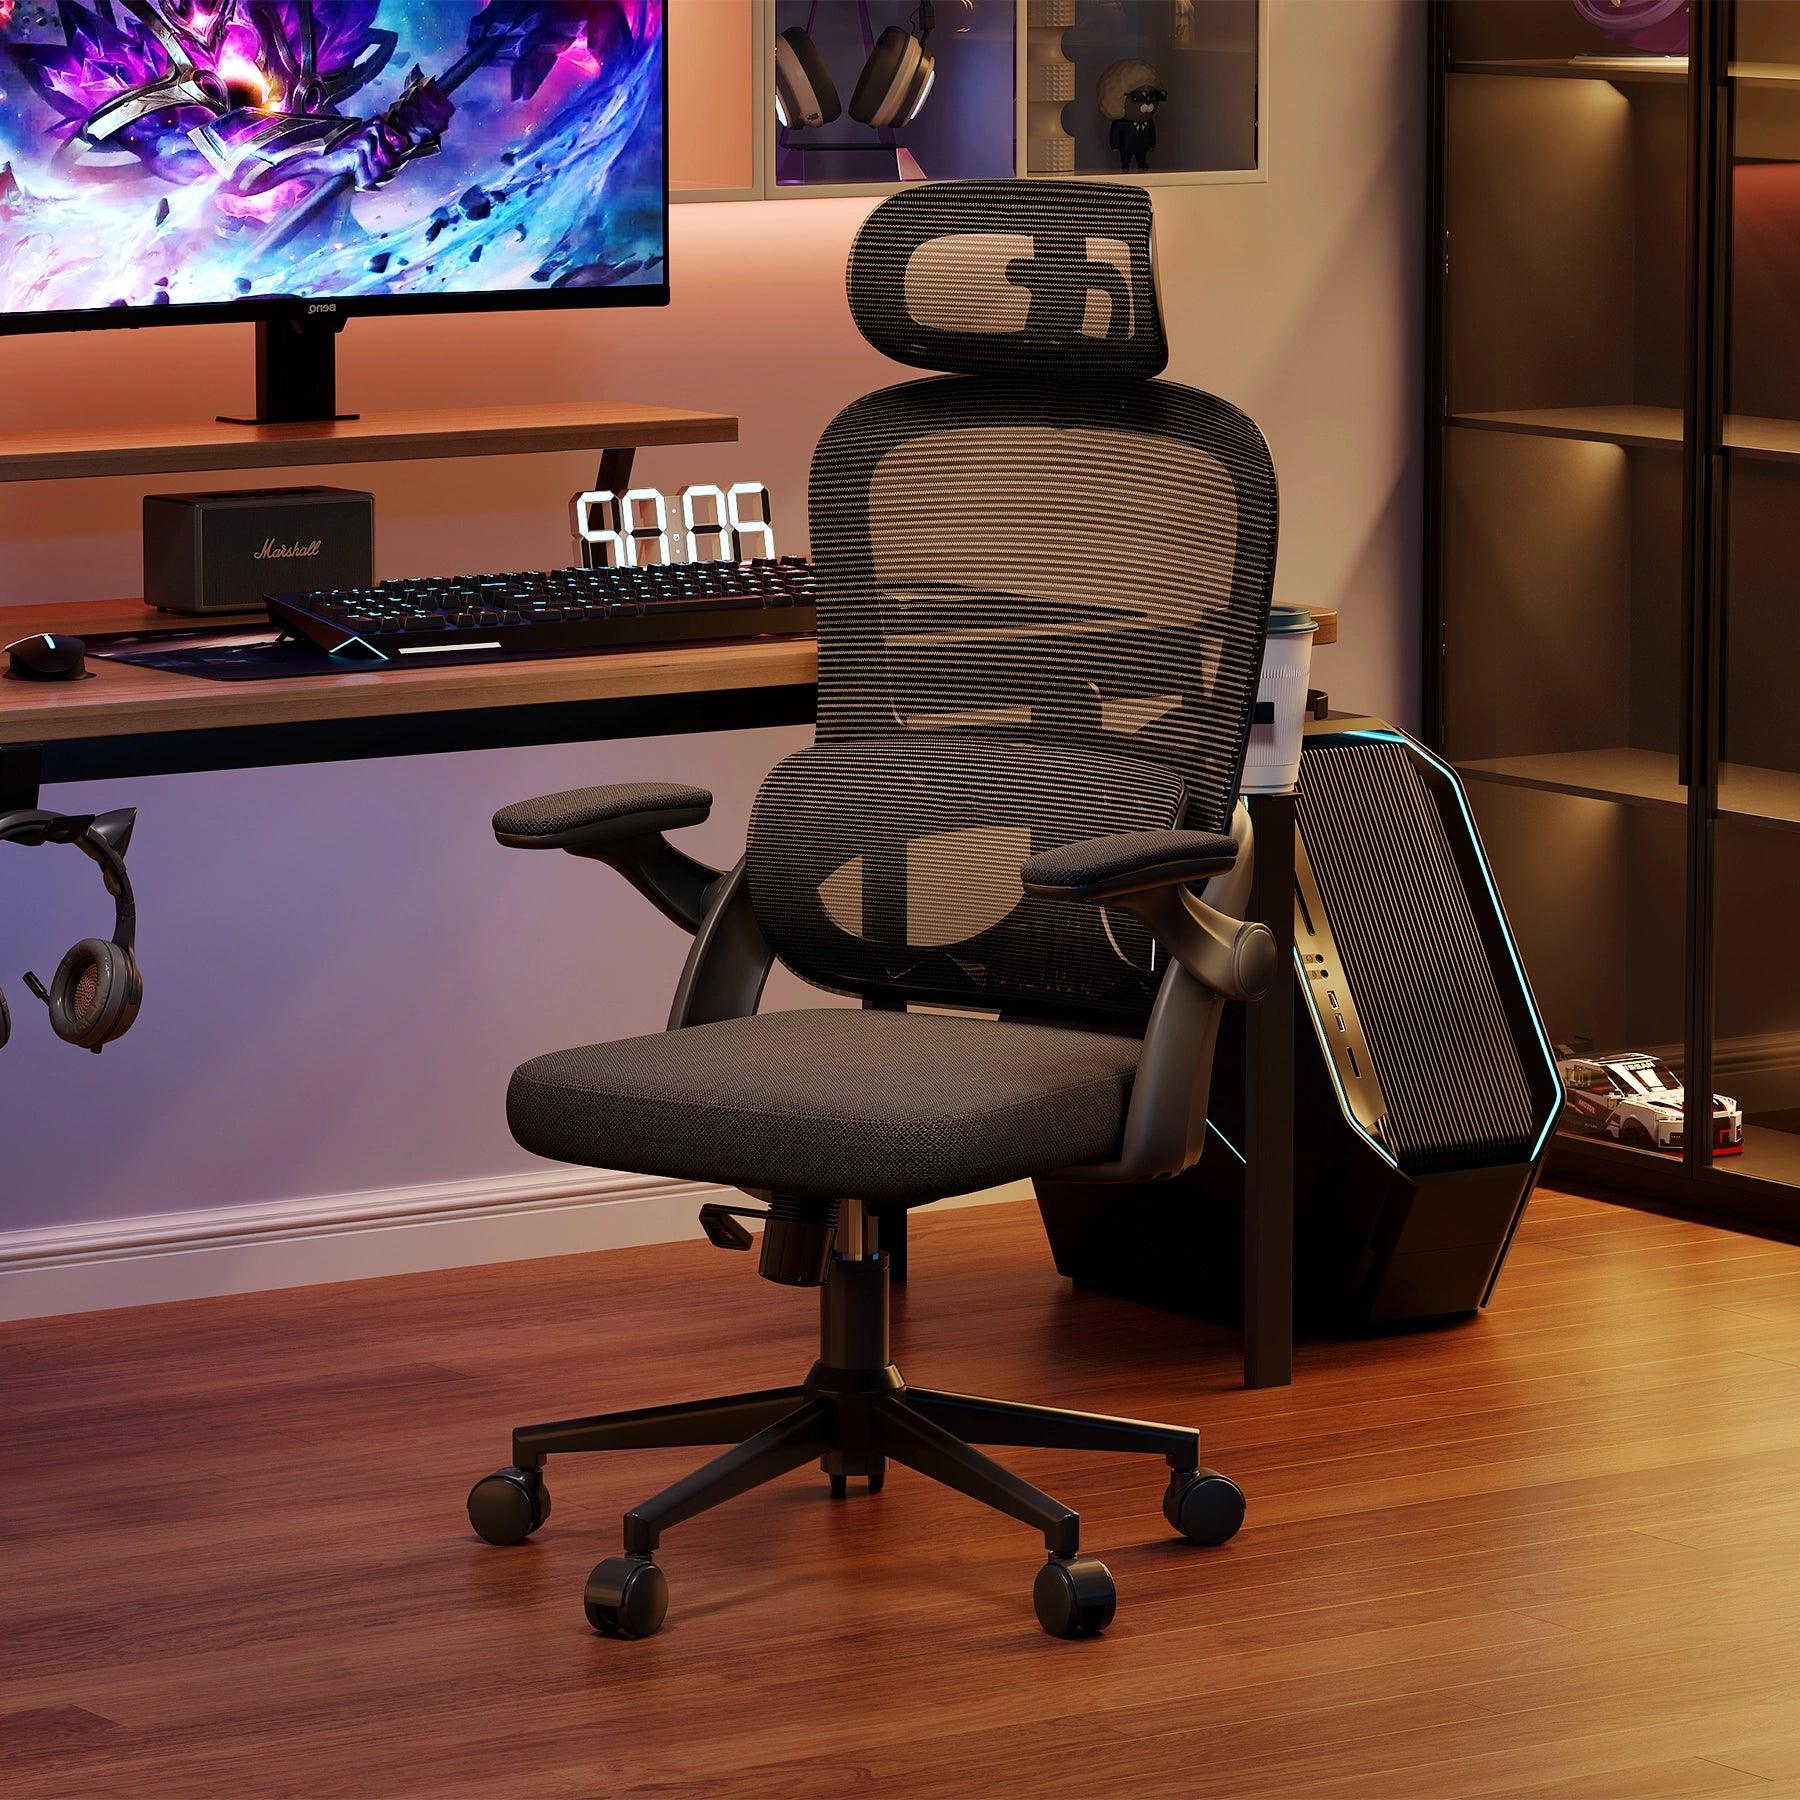 Sihoo M102C Ergonomic Office Chair with Customizable Lumbar Support - Official US Sihoo Store